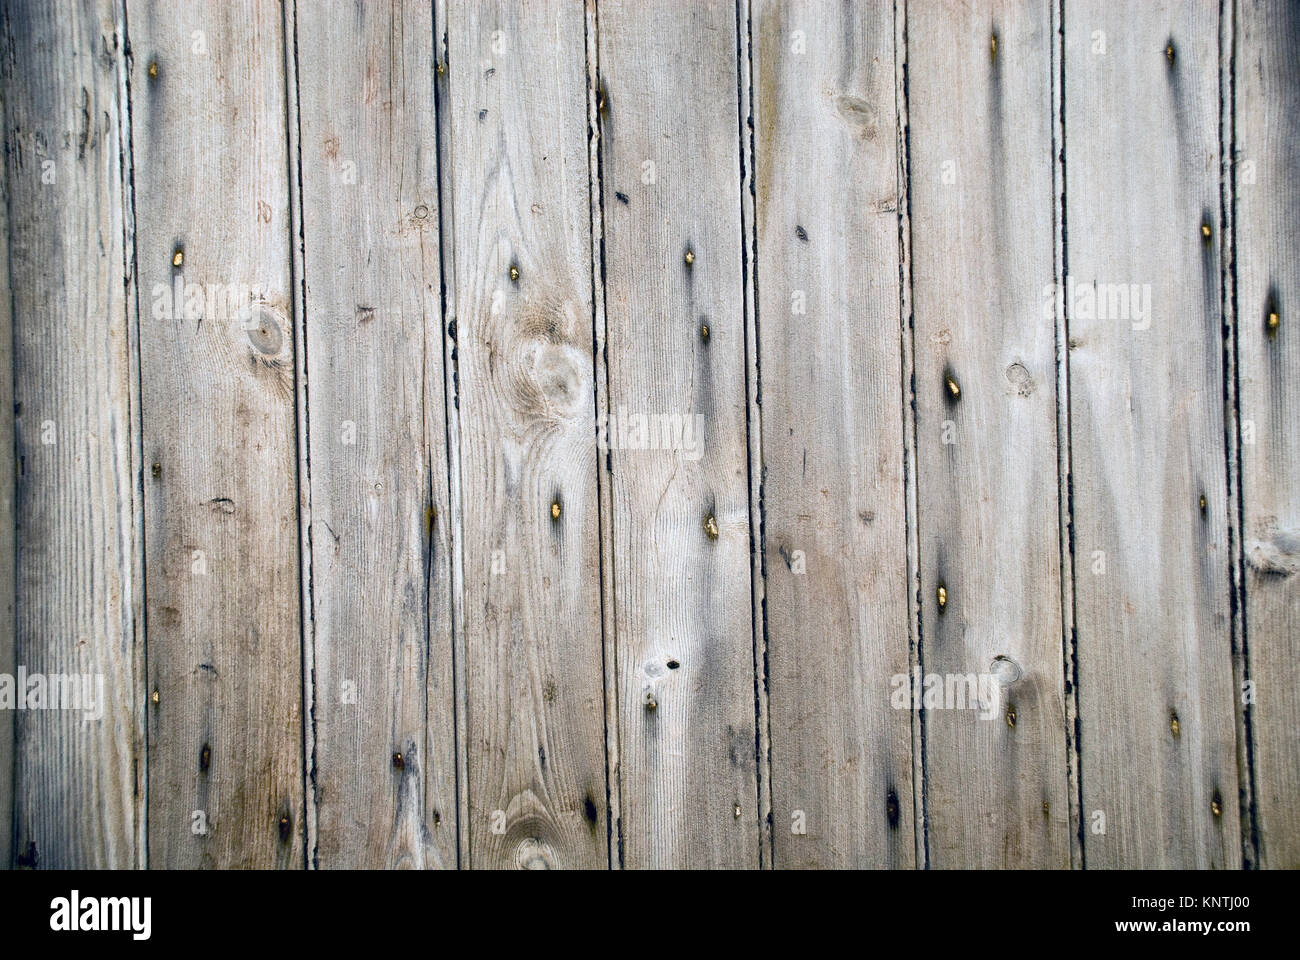 Run down and forgotten wooden panels. Stock Photo